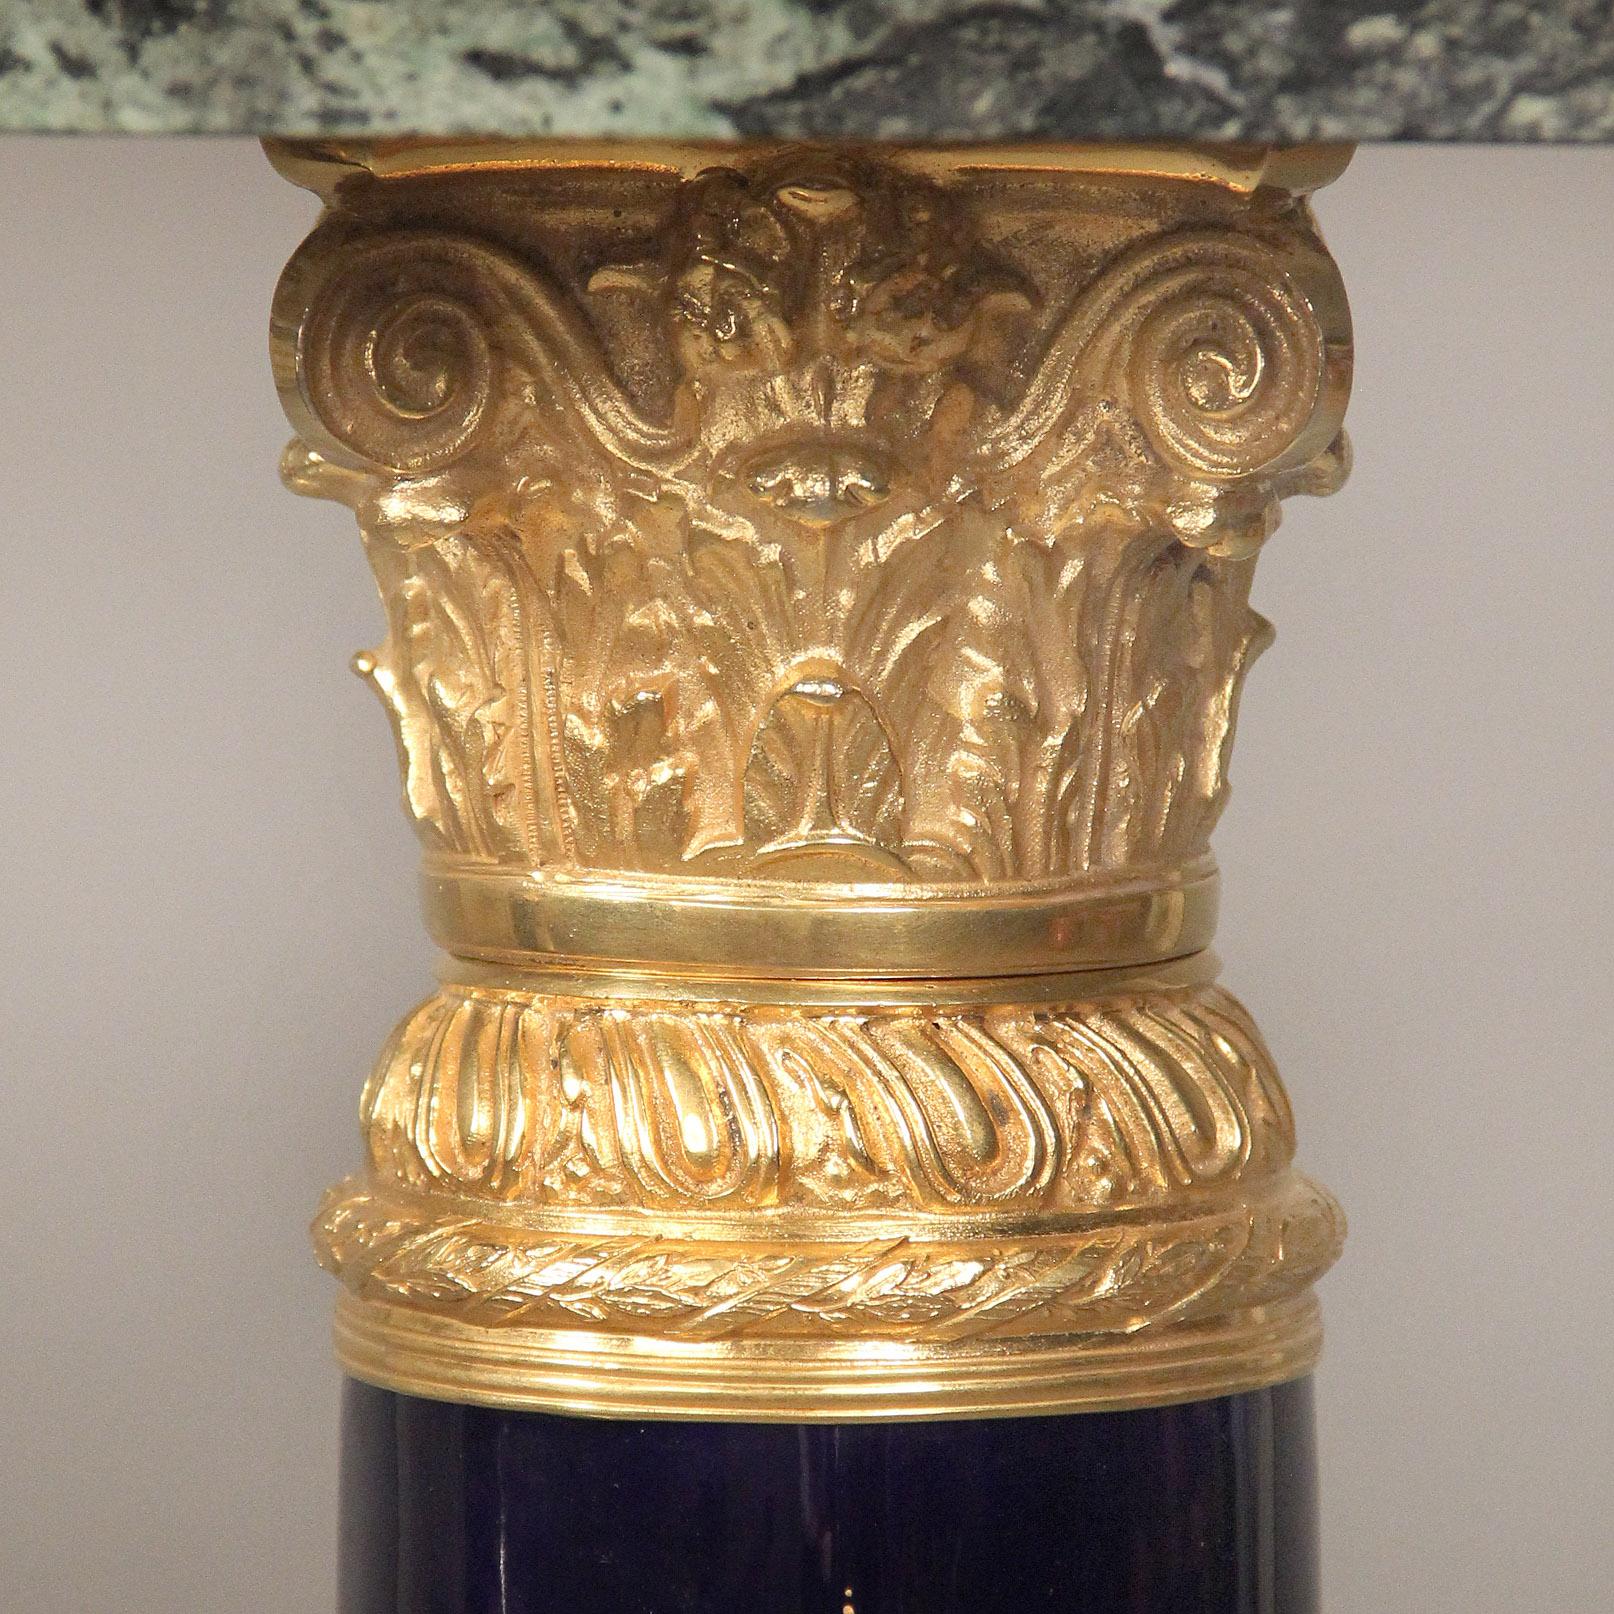 Pair of Late 19th Century Gilt Bronze-Mounted Sèvres Style Pedestals For Sale 1